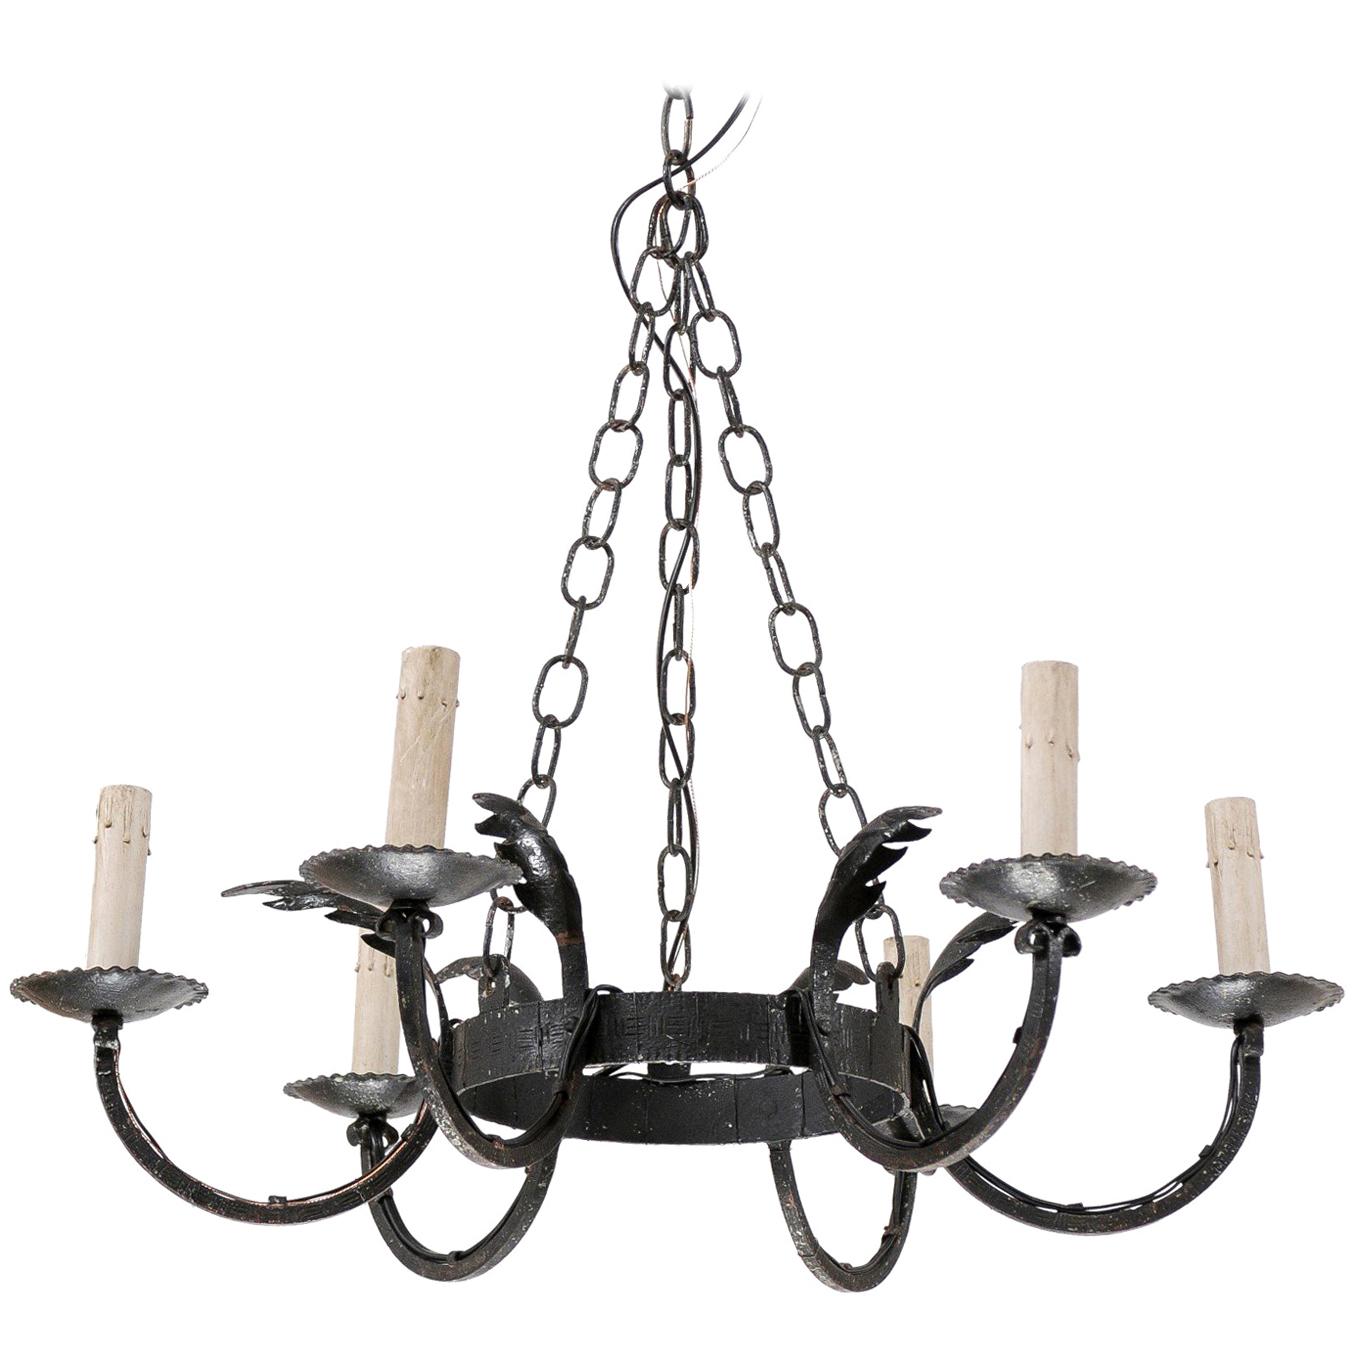 French 6-Light Round Iron Chandelier from the Mid-20th Century For Sale